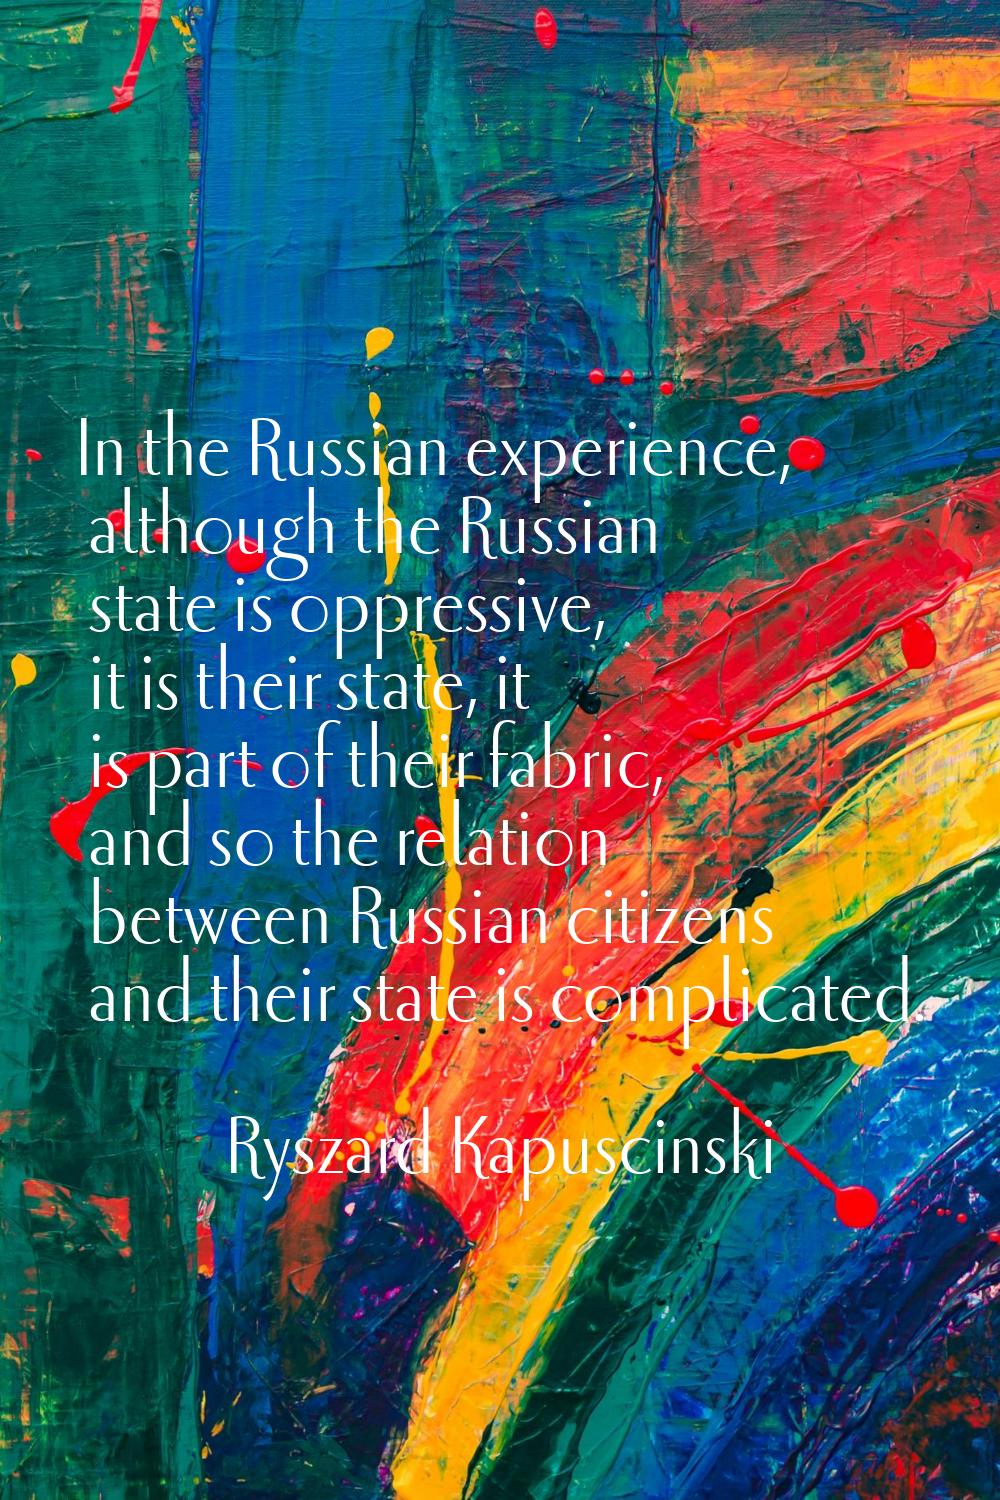 In the Russian experience, although the Russian state is oppressive, it is their state, it is part 